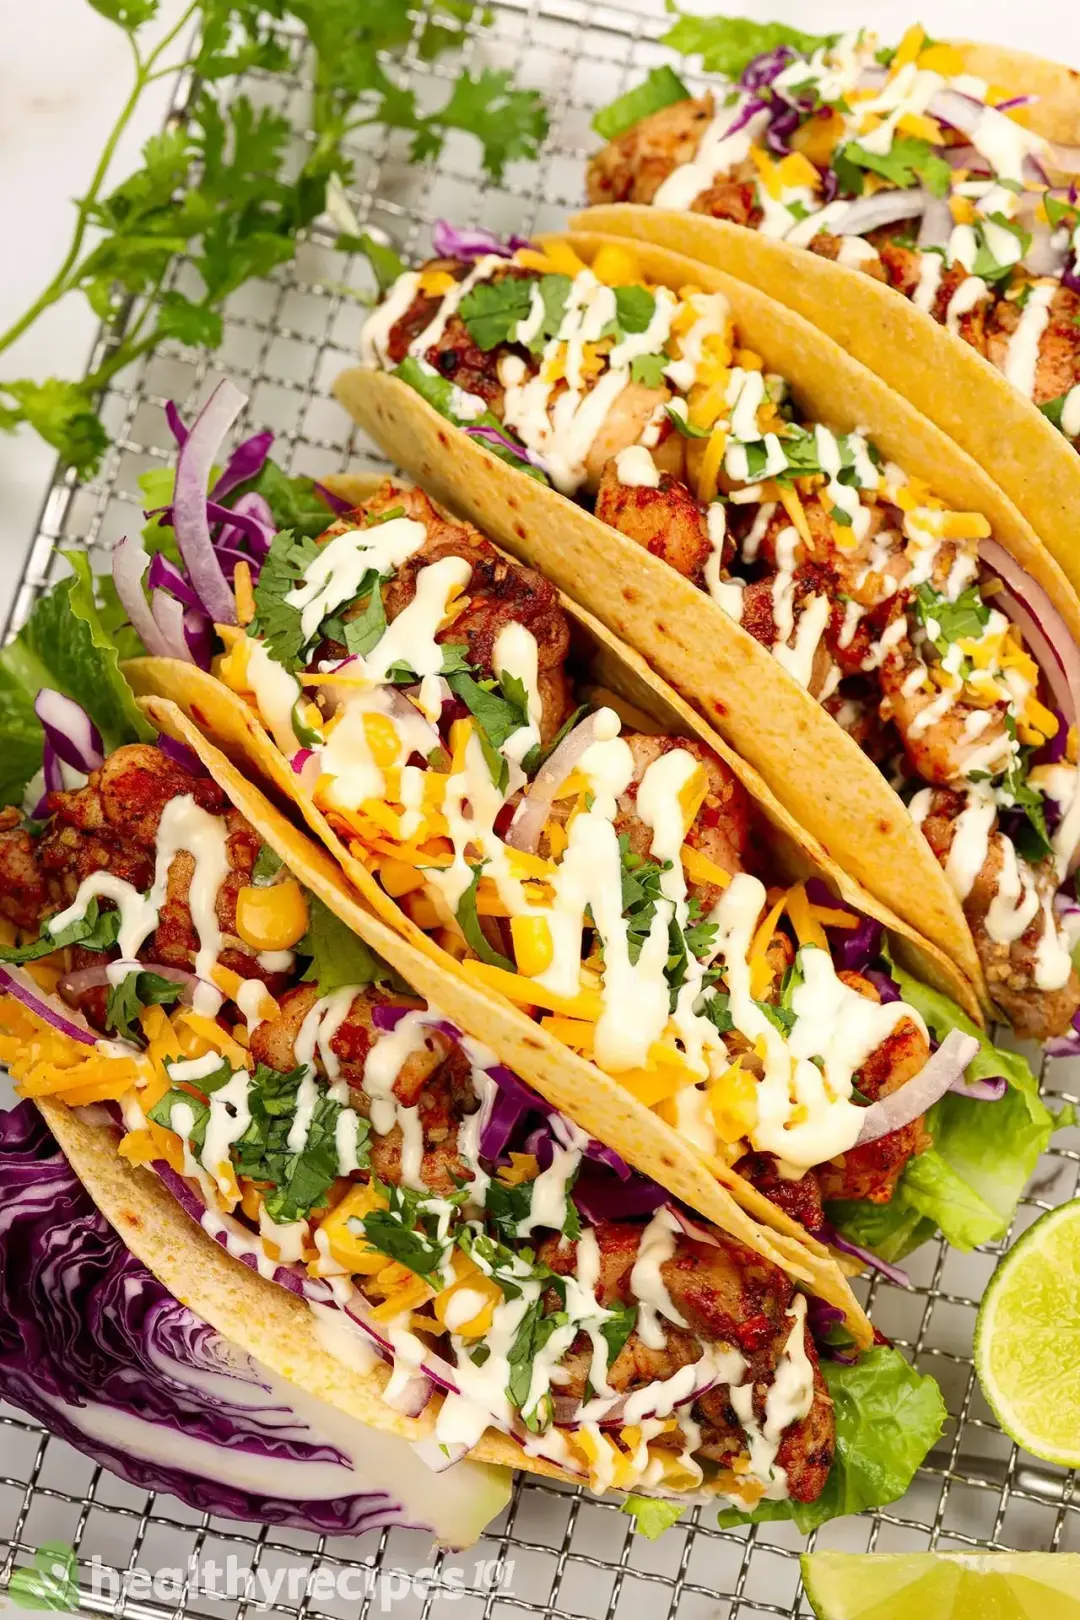 Is This Air Fryer Chicken Tacos Recipe Healthy